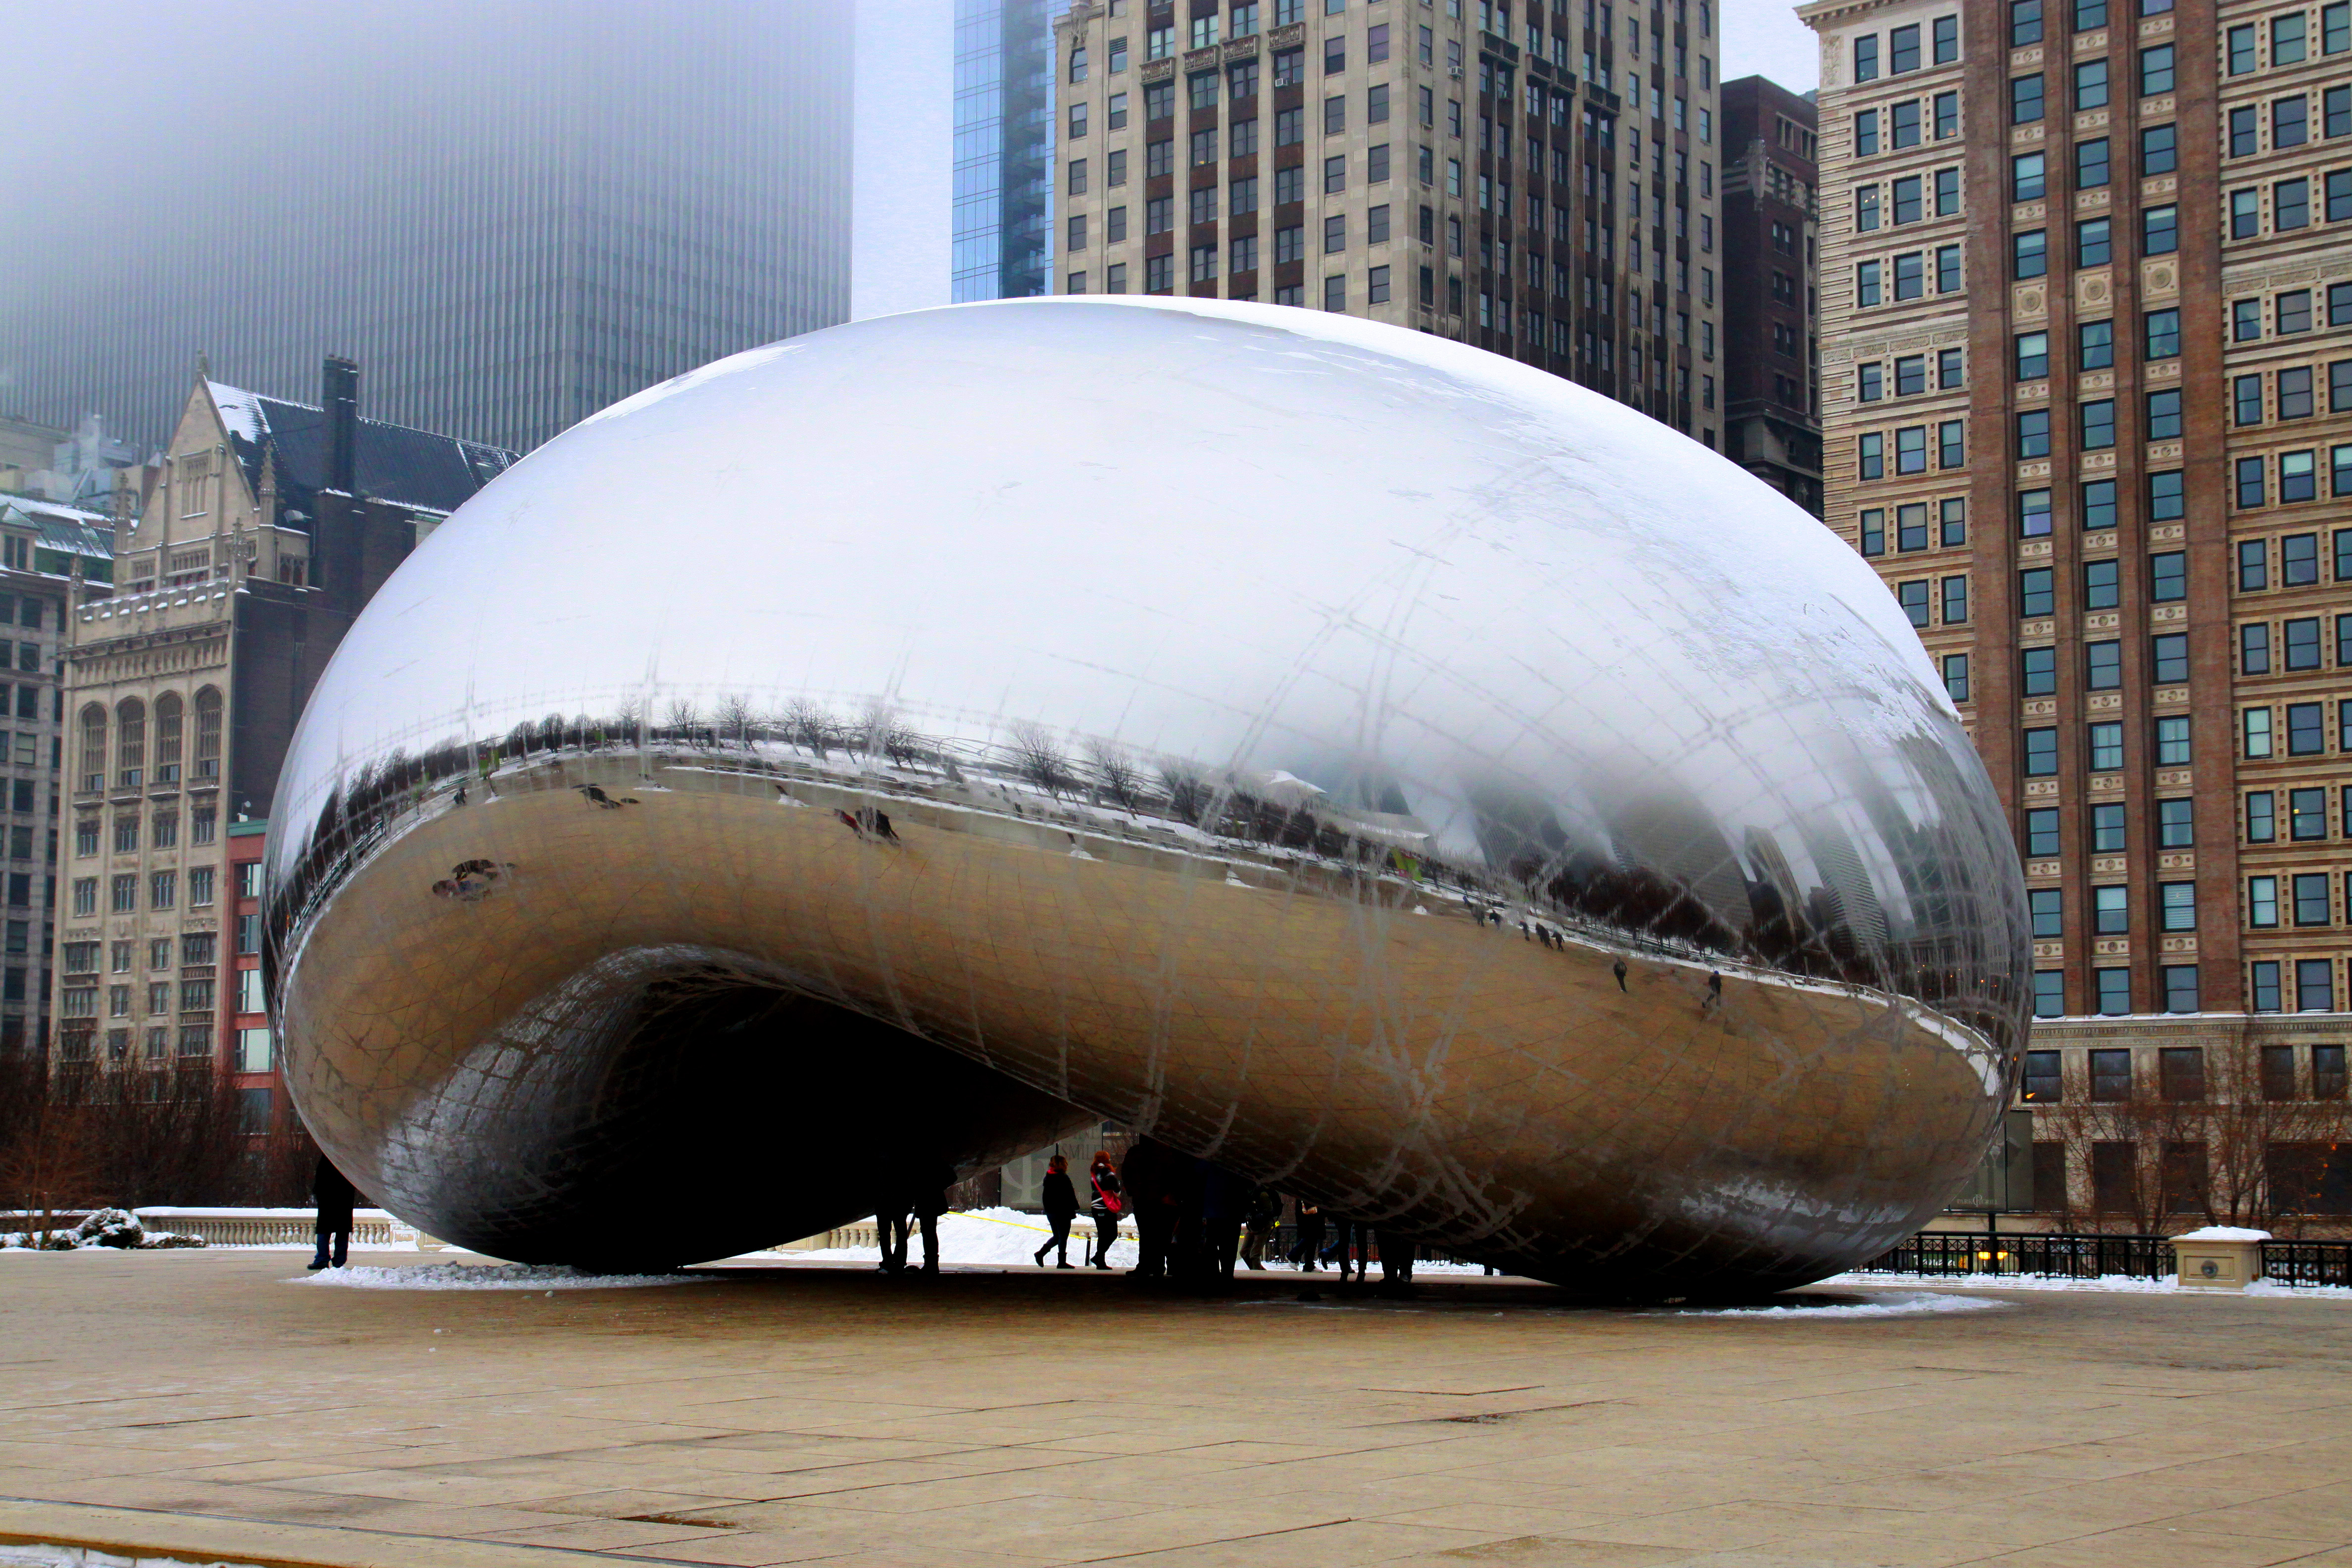 Anish Kapoor's Cloud Gate, on a winter and foggy afternoon in Chicago, Illinois on January 22, 2012. (Raymond Boyd—Getty Images)